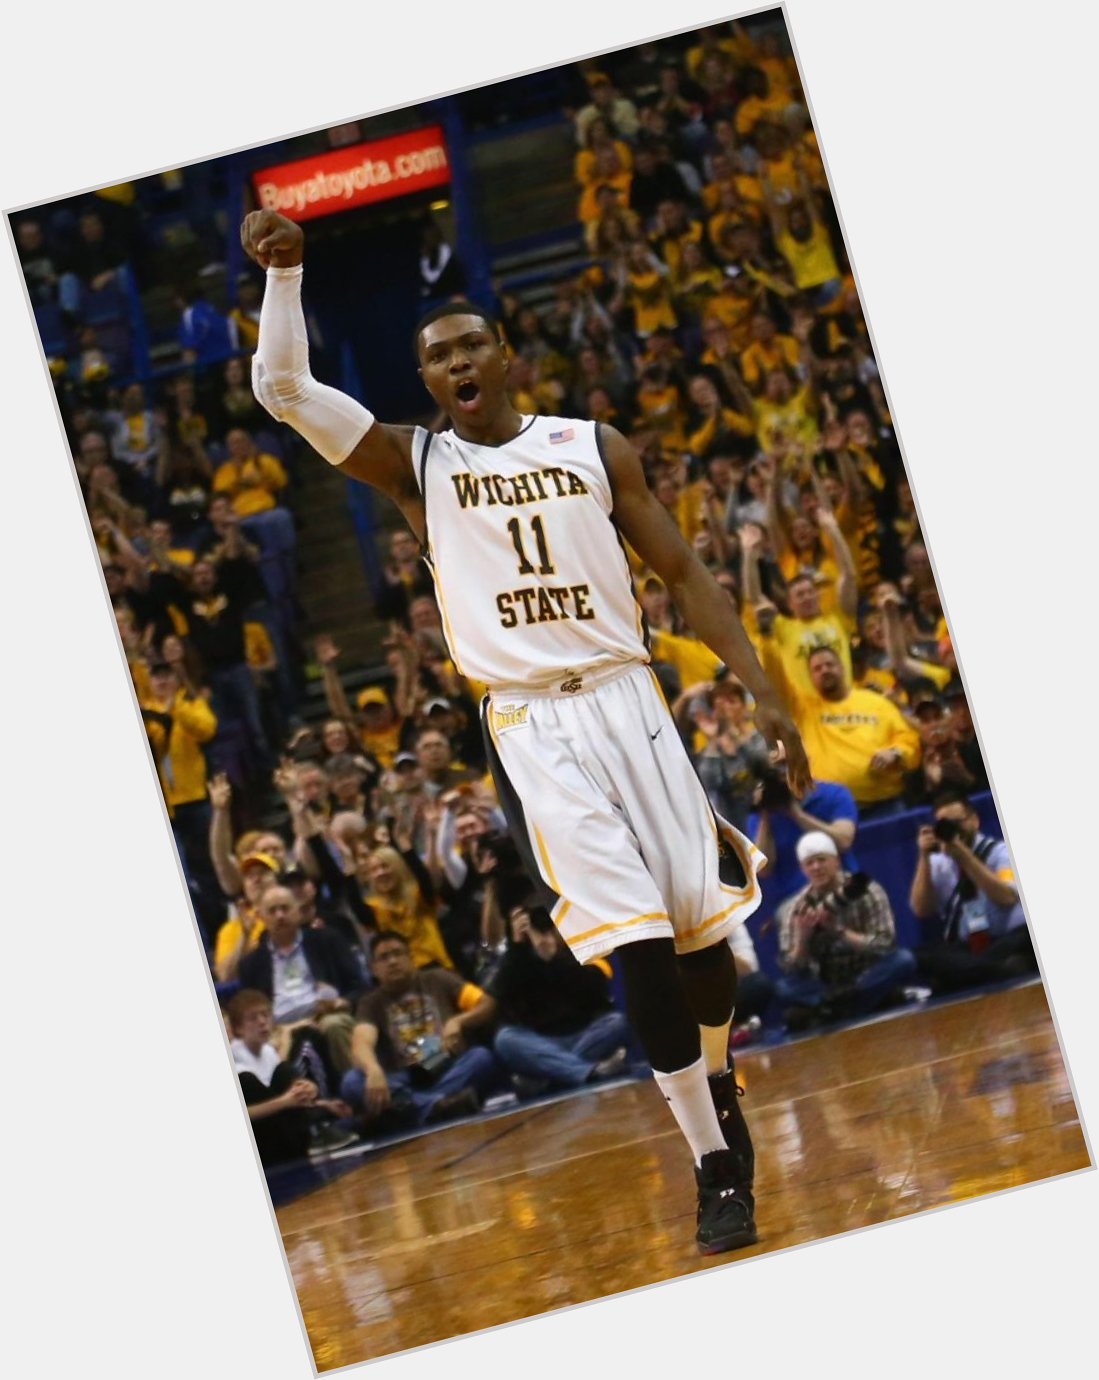 Happy 24th birthday to the one and only Cleanthony Early! Congratulations 